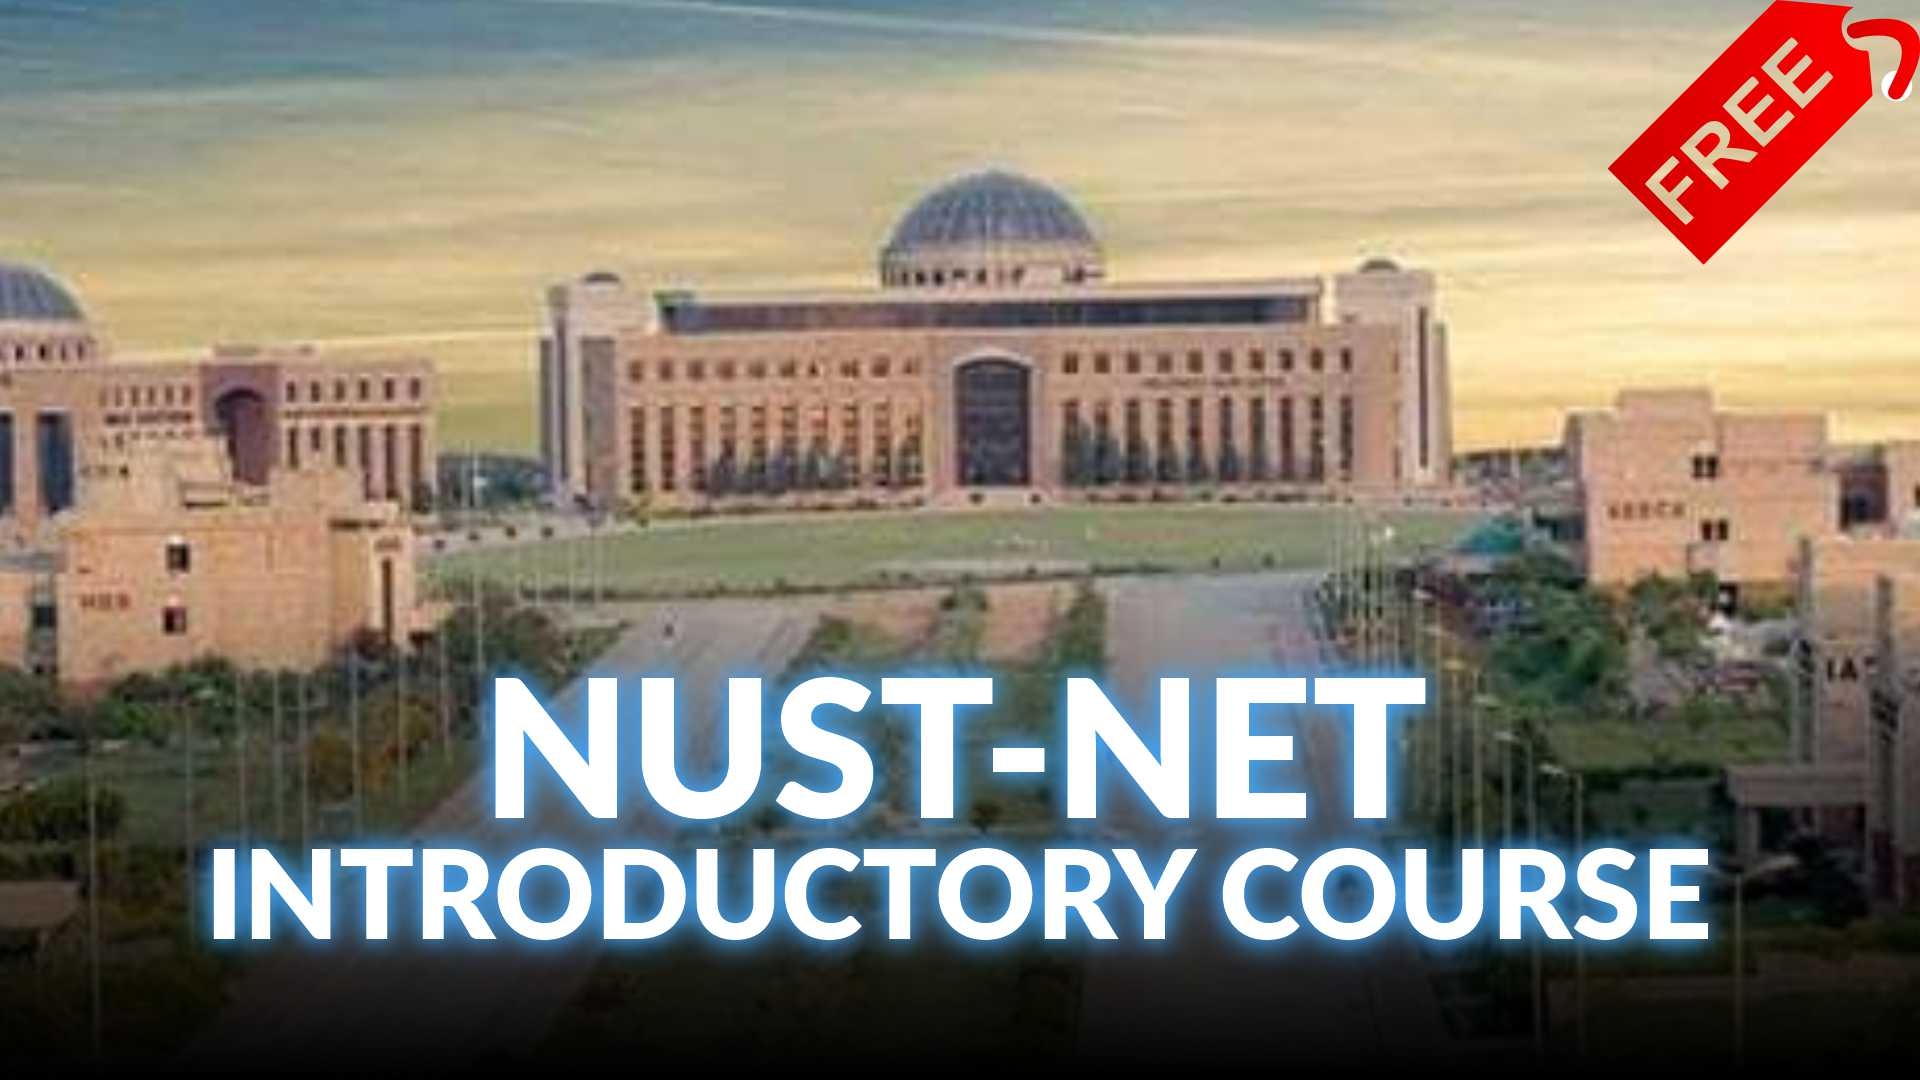 NUST Entry Tests - NET Introductory Course